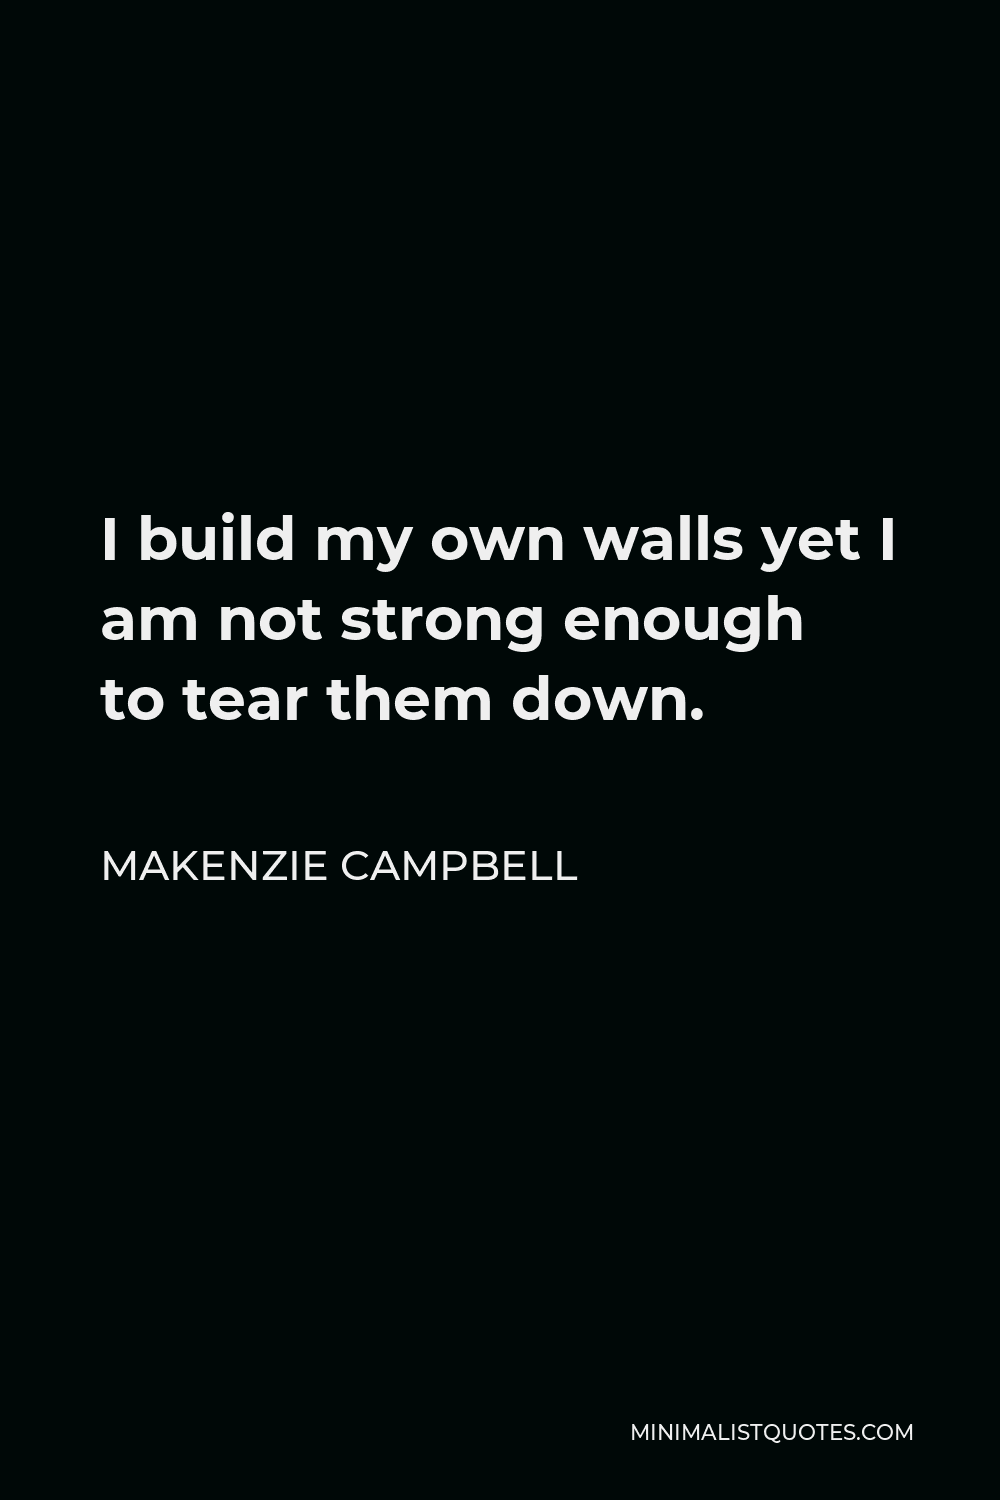 Makenzie Campbell Quote - I build my own walls yet I am not strong enough to tear them down.